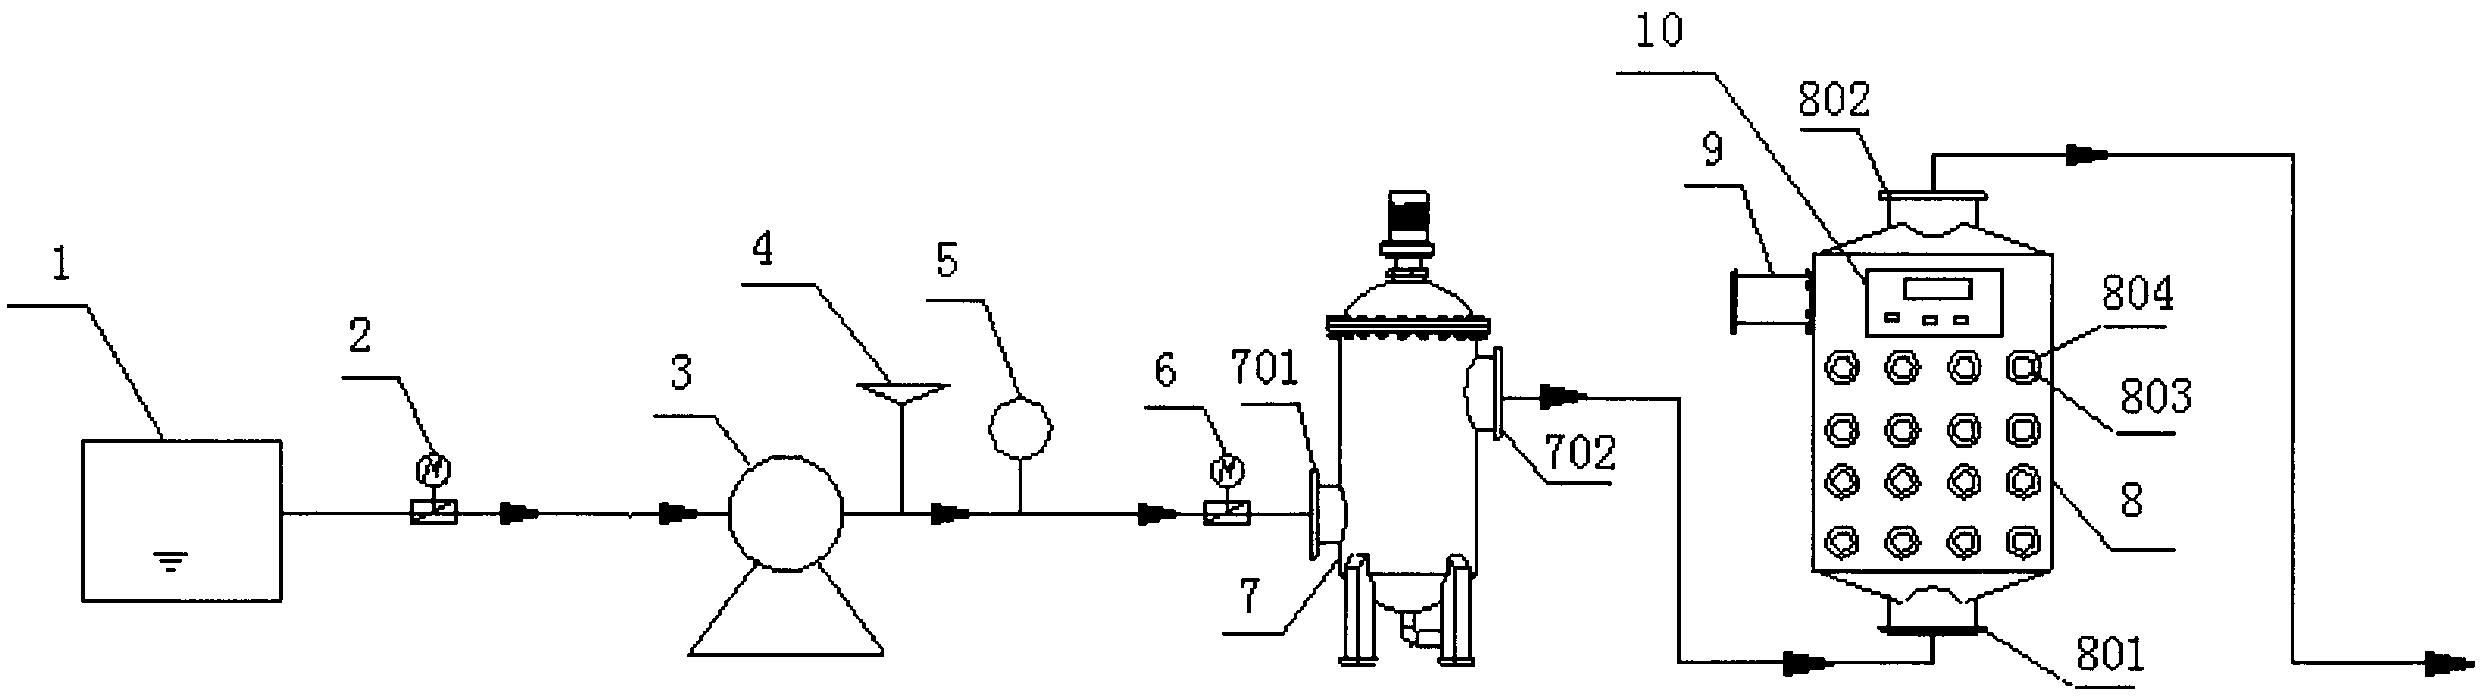 Method and apparatus for processing ship ballast water through filtration, ultraviolet and ultrasound